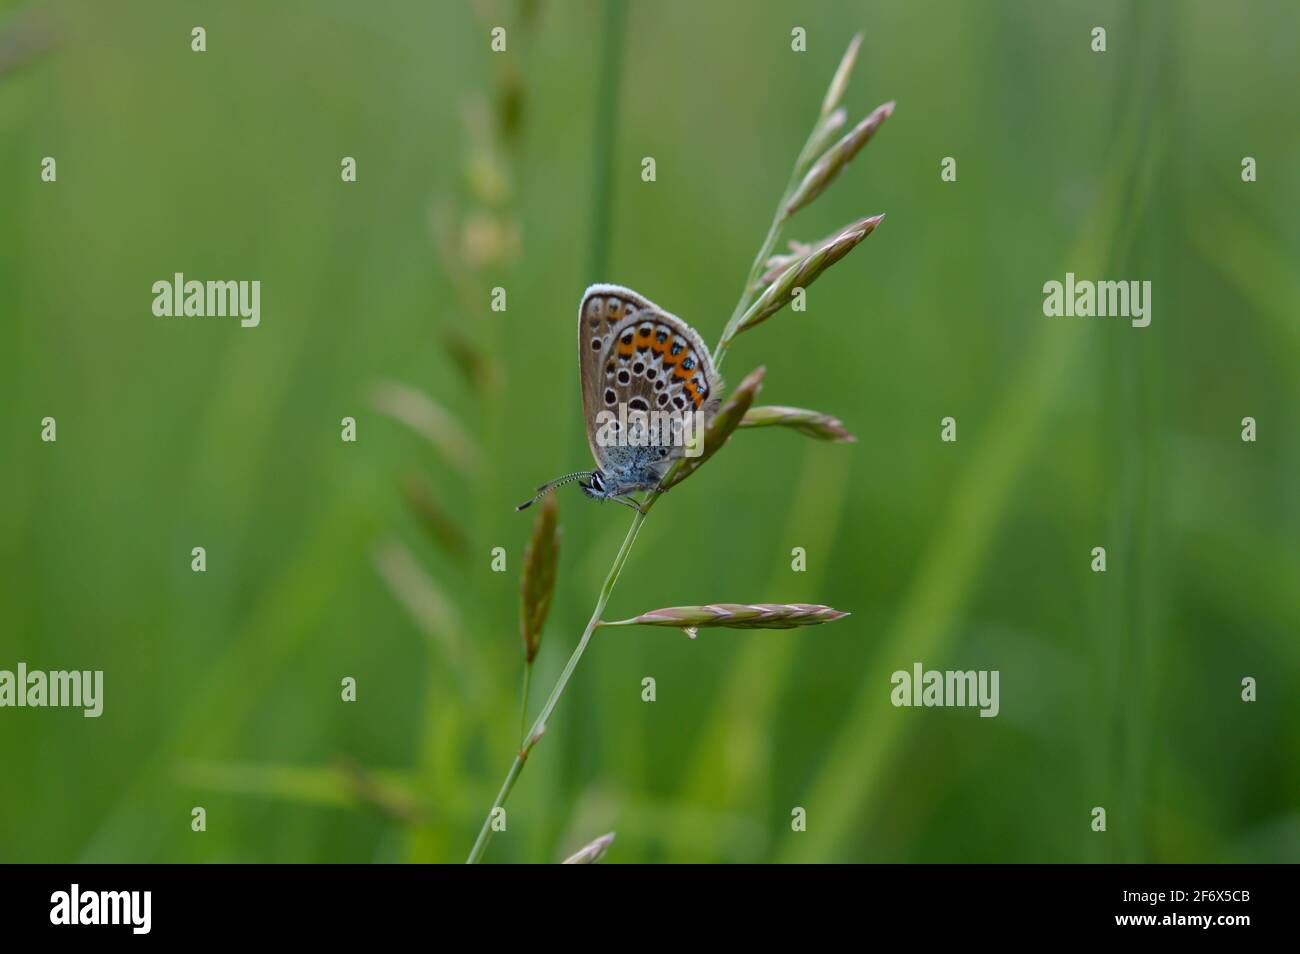 Lycaenidae butterfly in nature on a plant close up, small butterfly with blue body brown and grey wings with spots Stock Photo